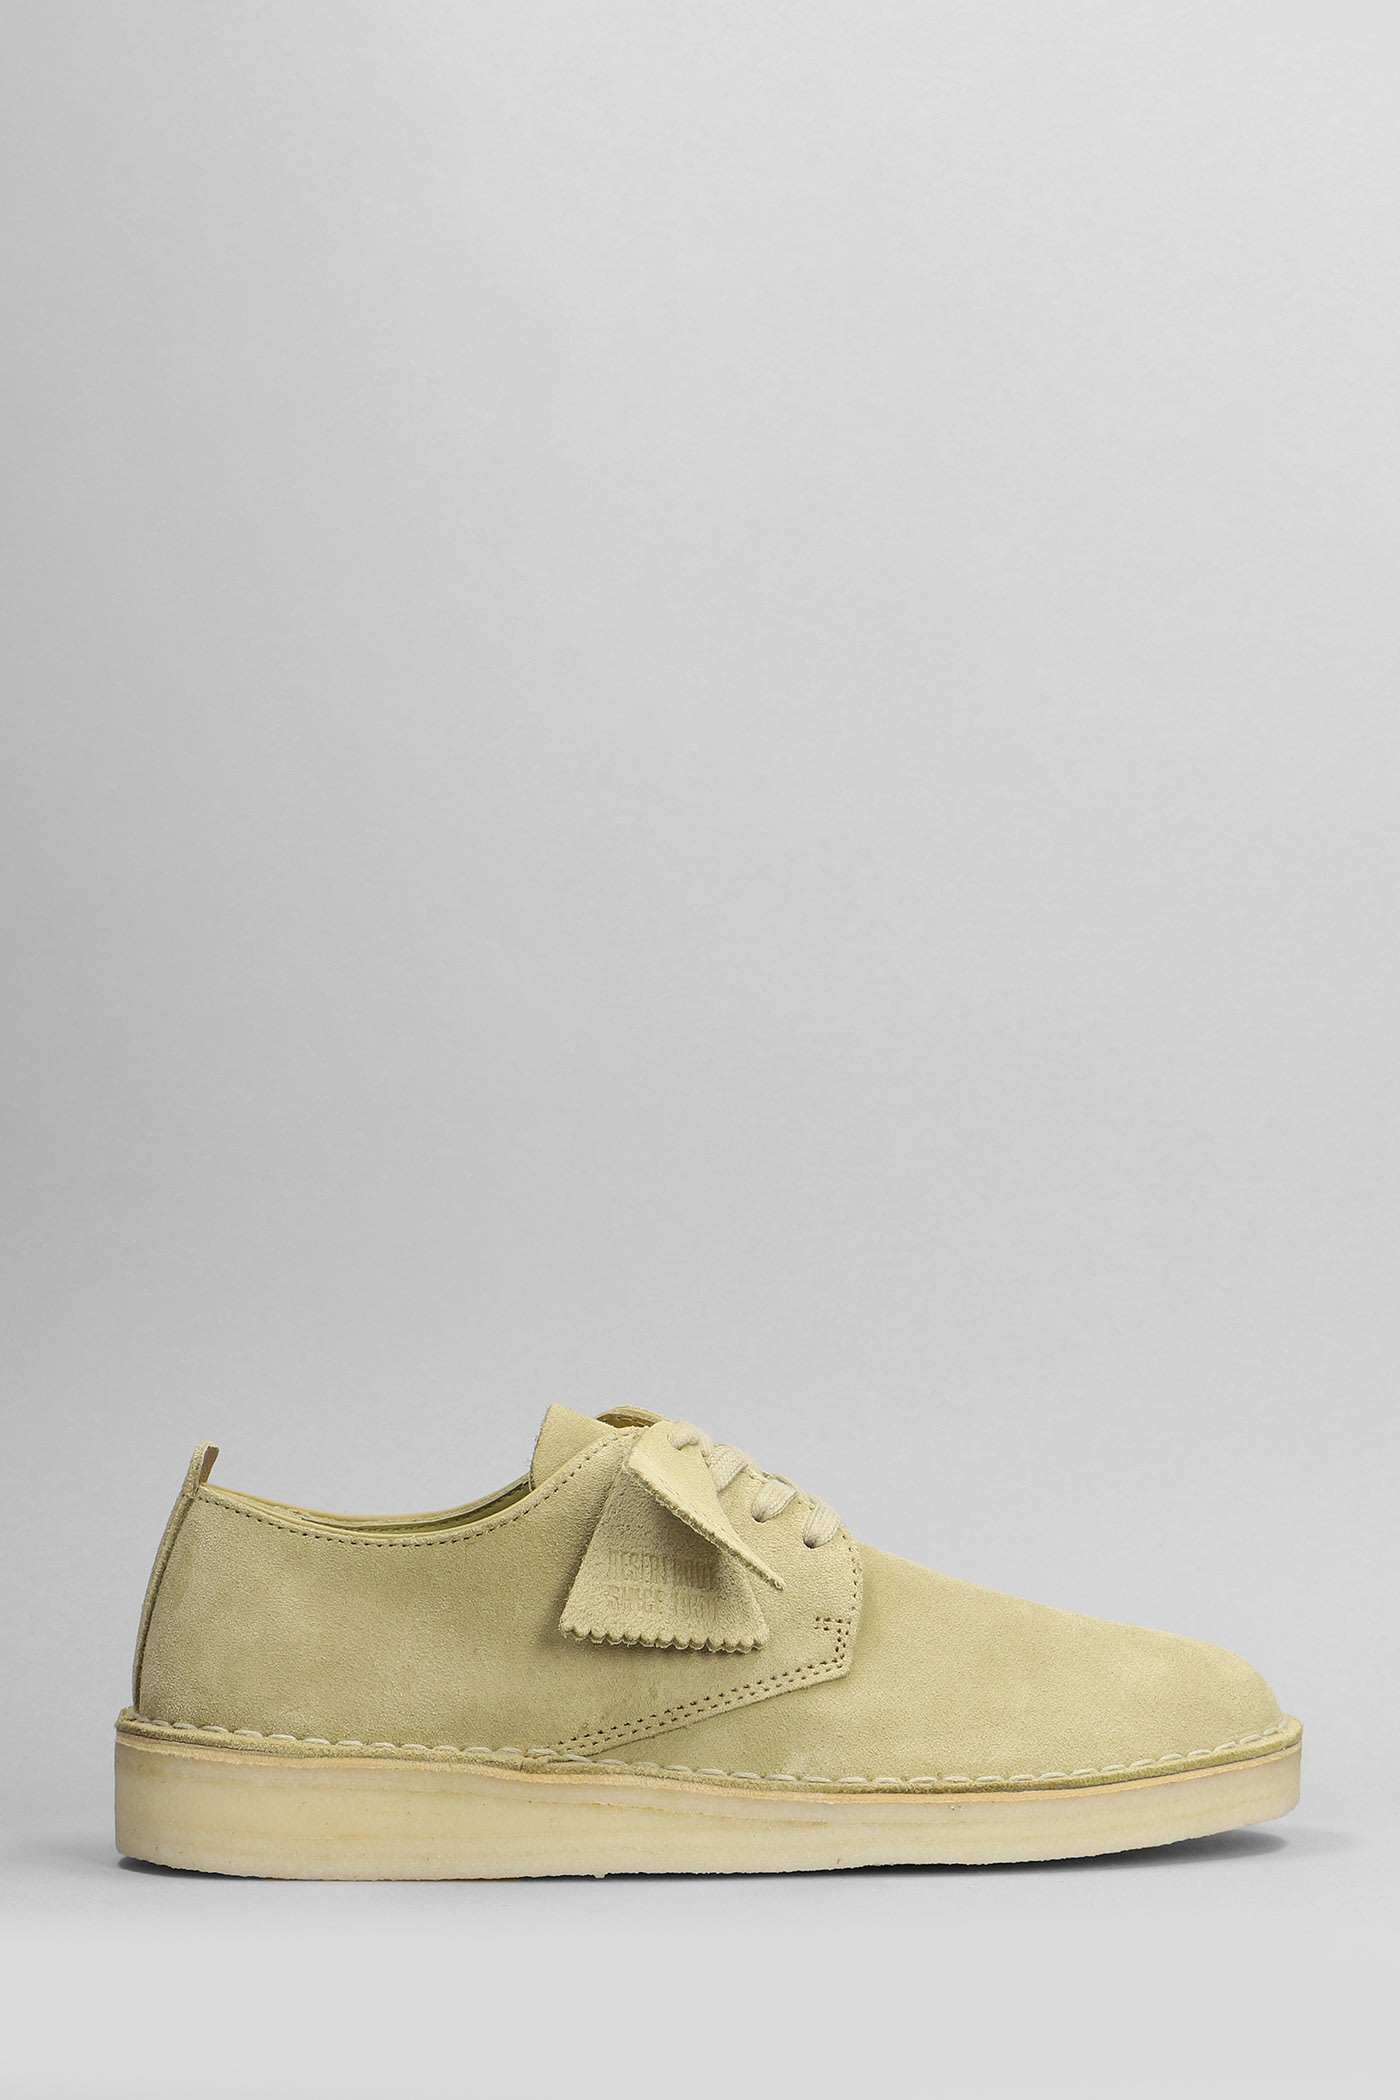 Coal London Lace Up Shoes In Khaki Suede